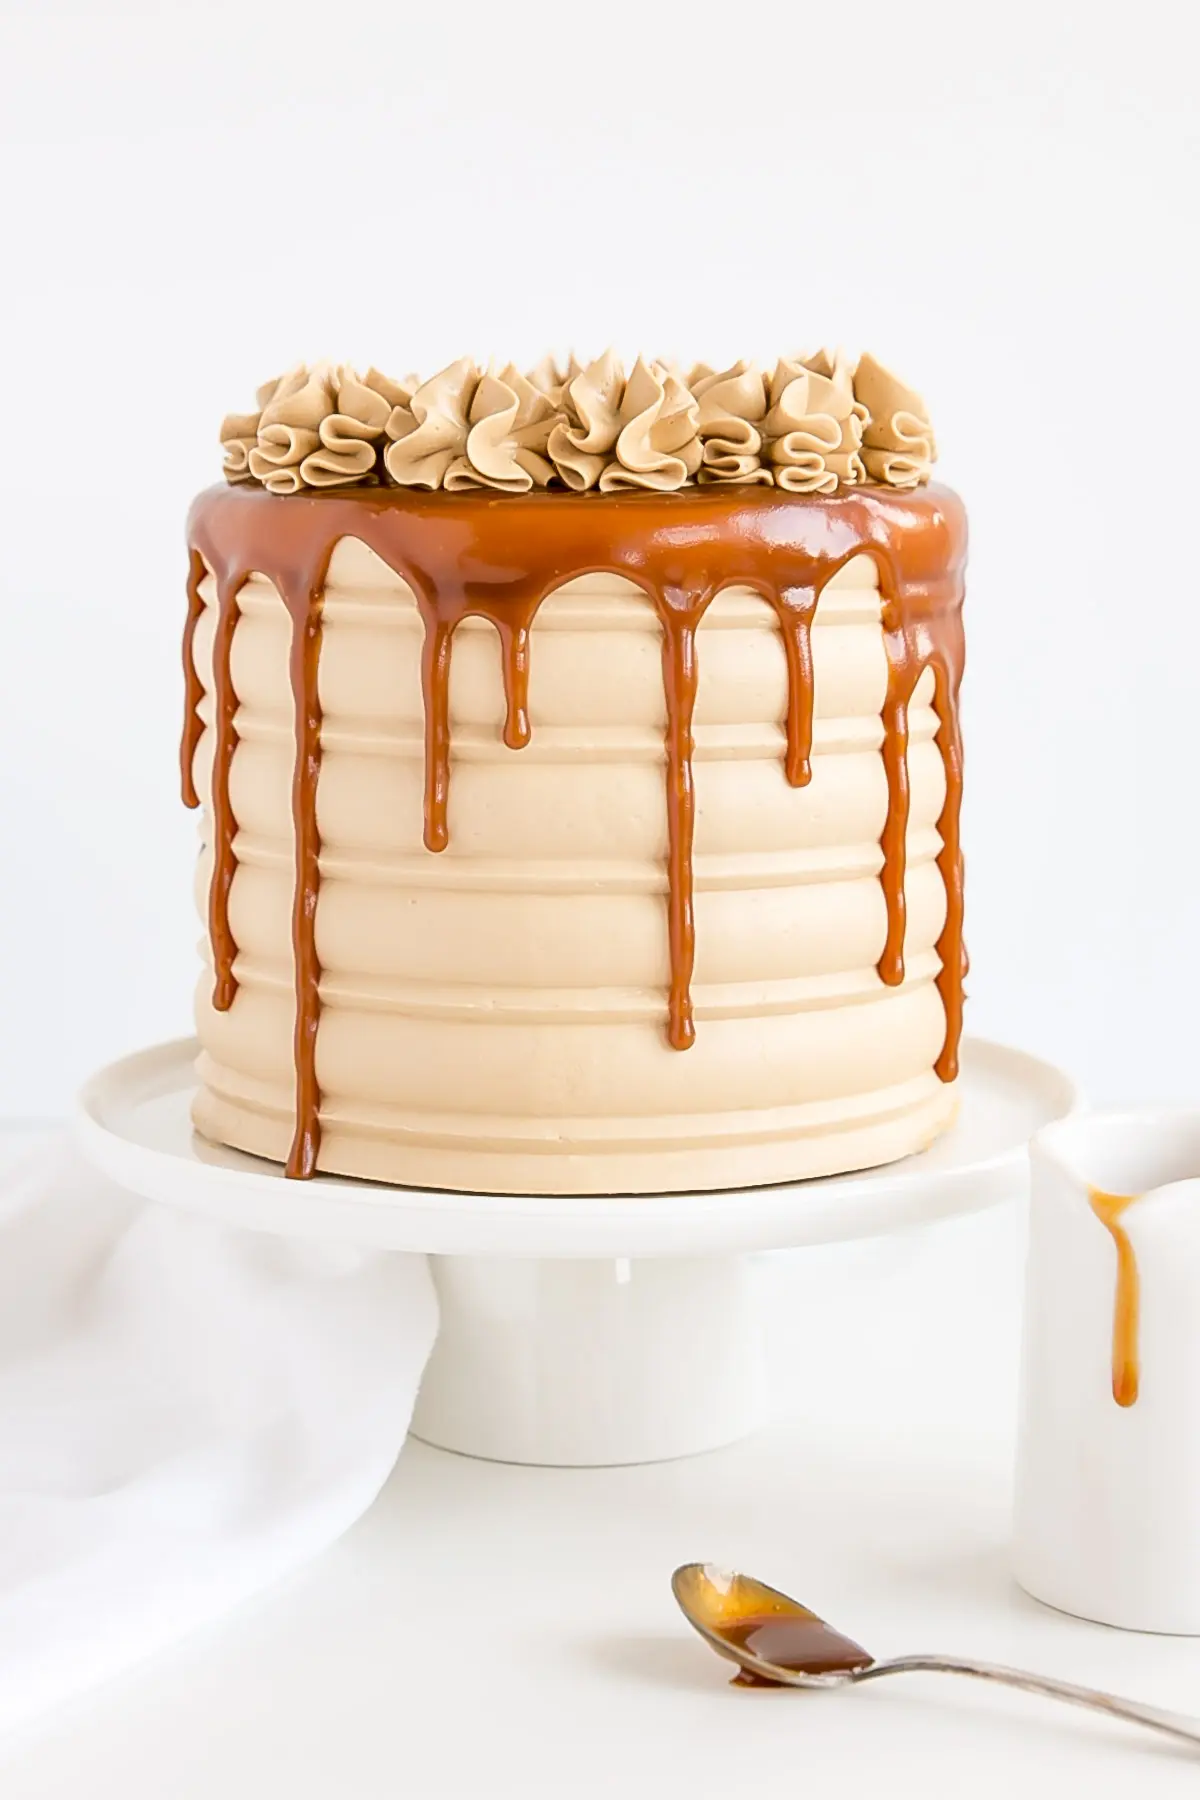 Caramel infused cake layers with a caramel buttercream and caramel drip.